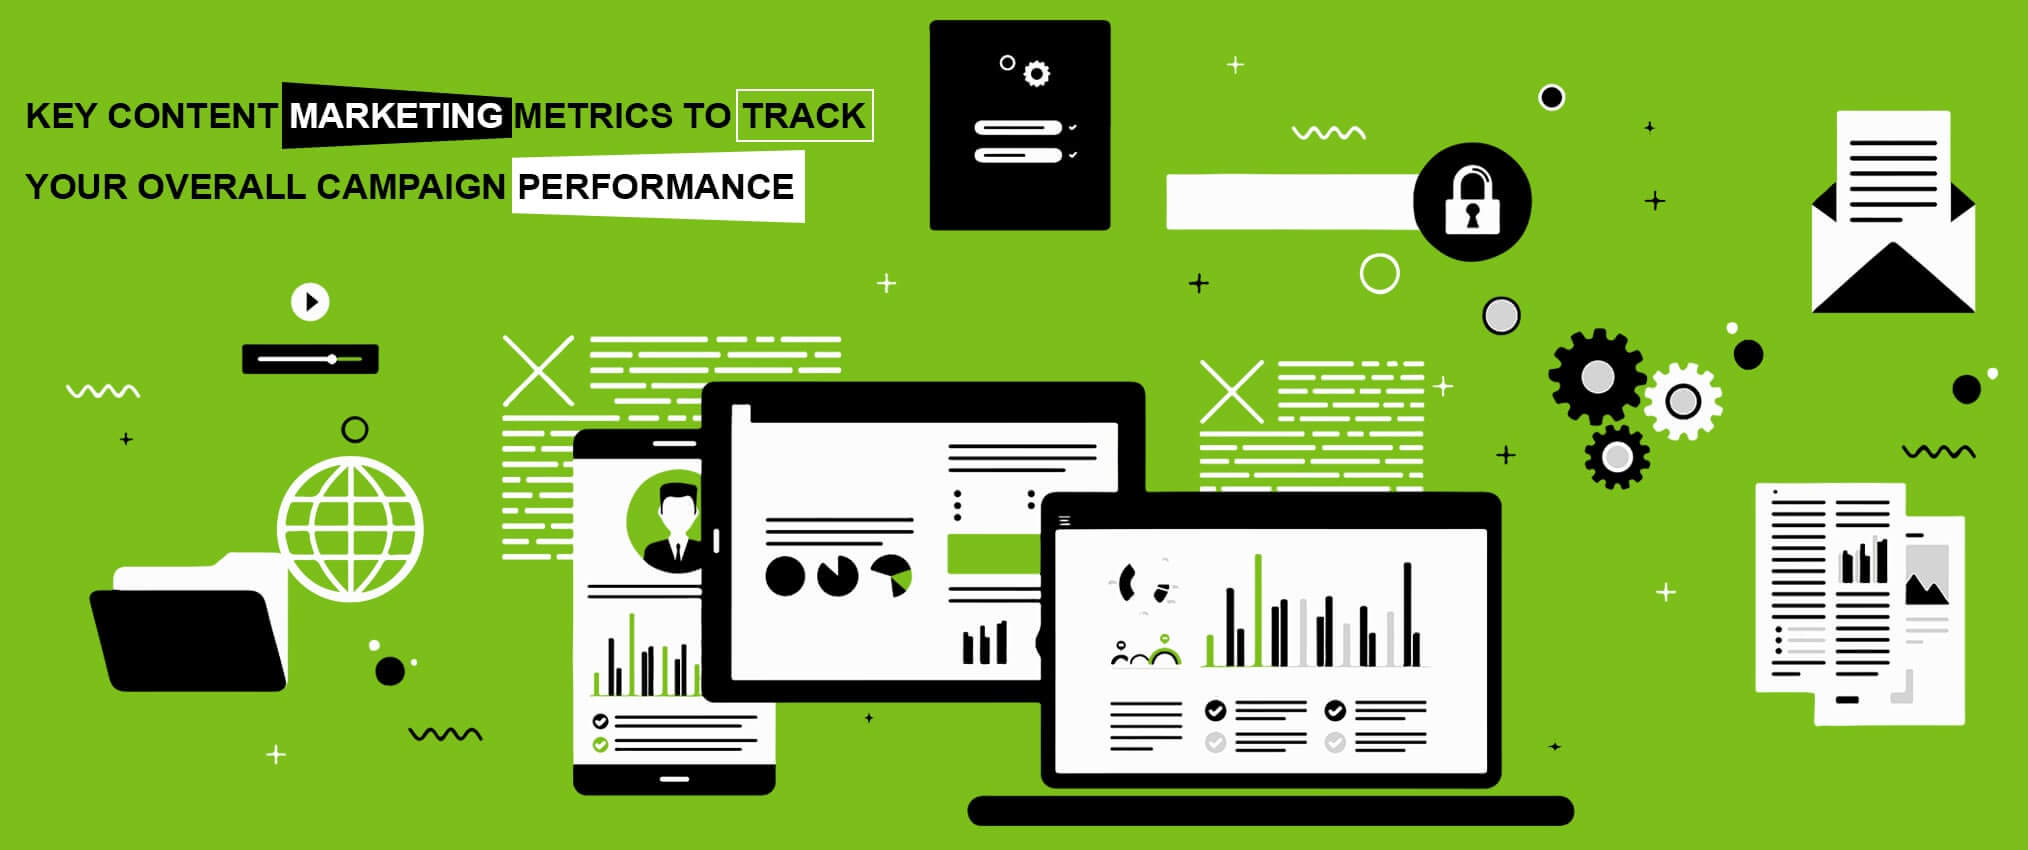 Key Content Marketing Metrics to track your overall campaign performance